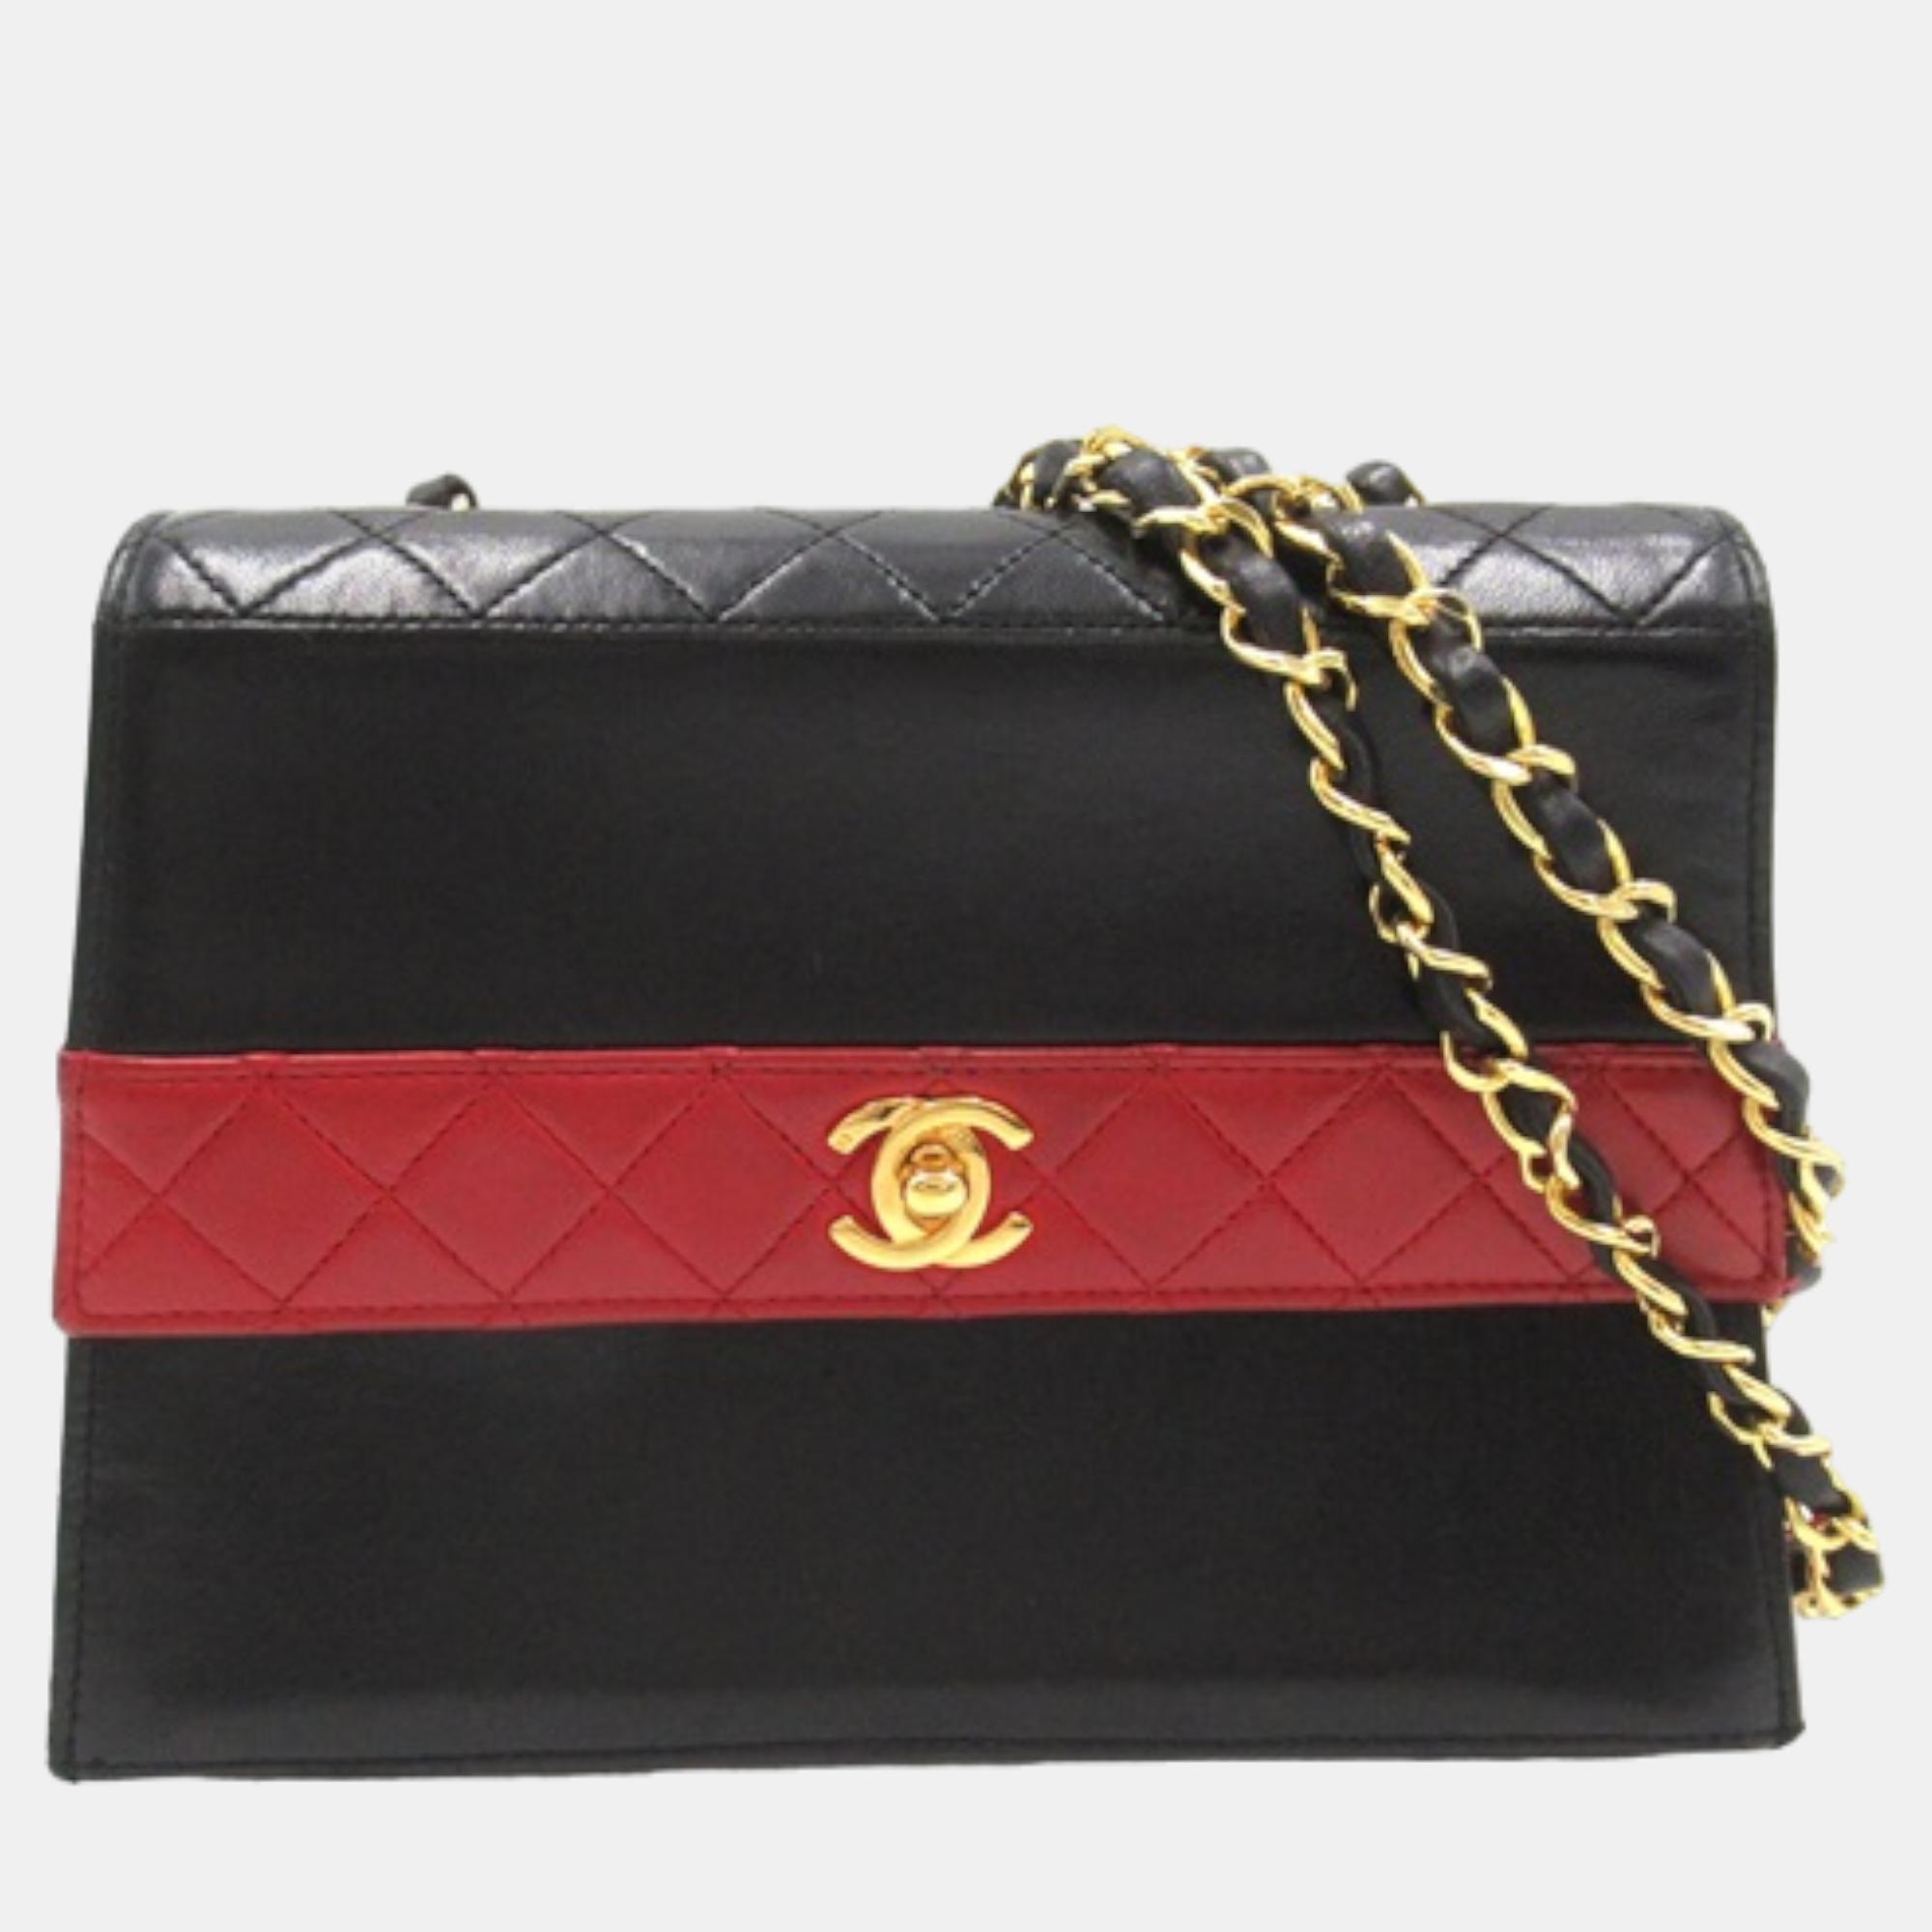 Chanel black/red leather trapezoid shoulder bag